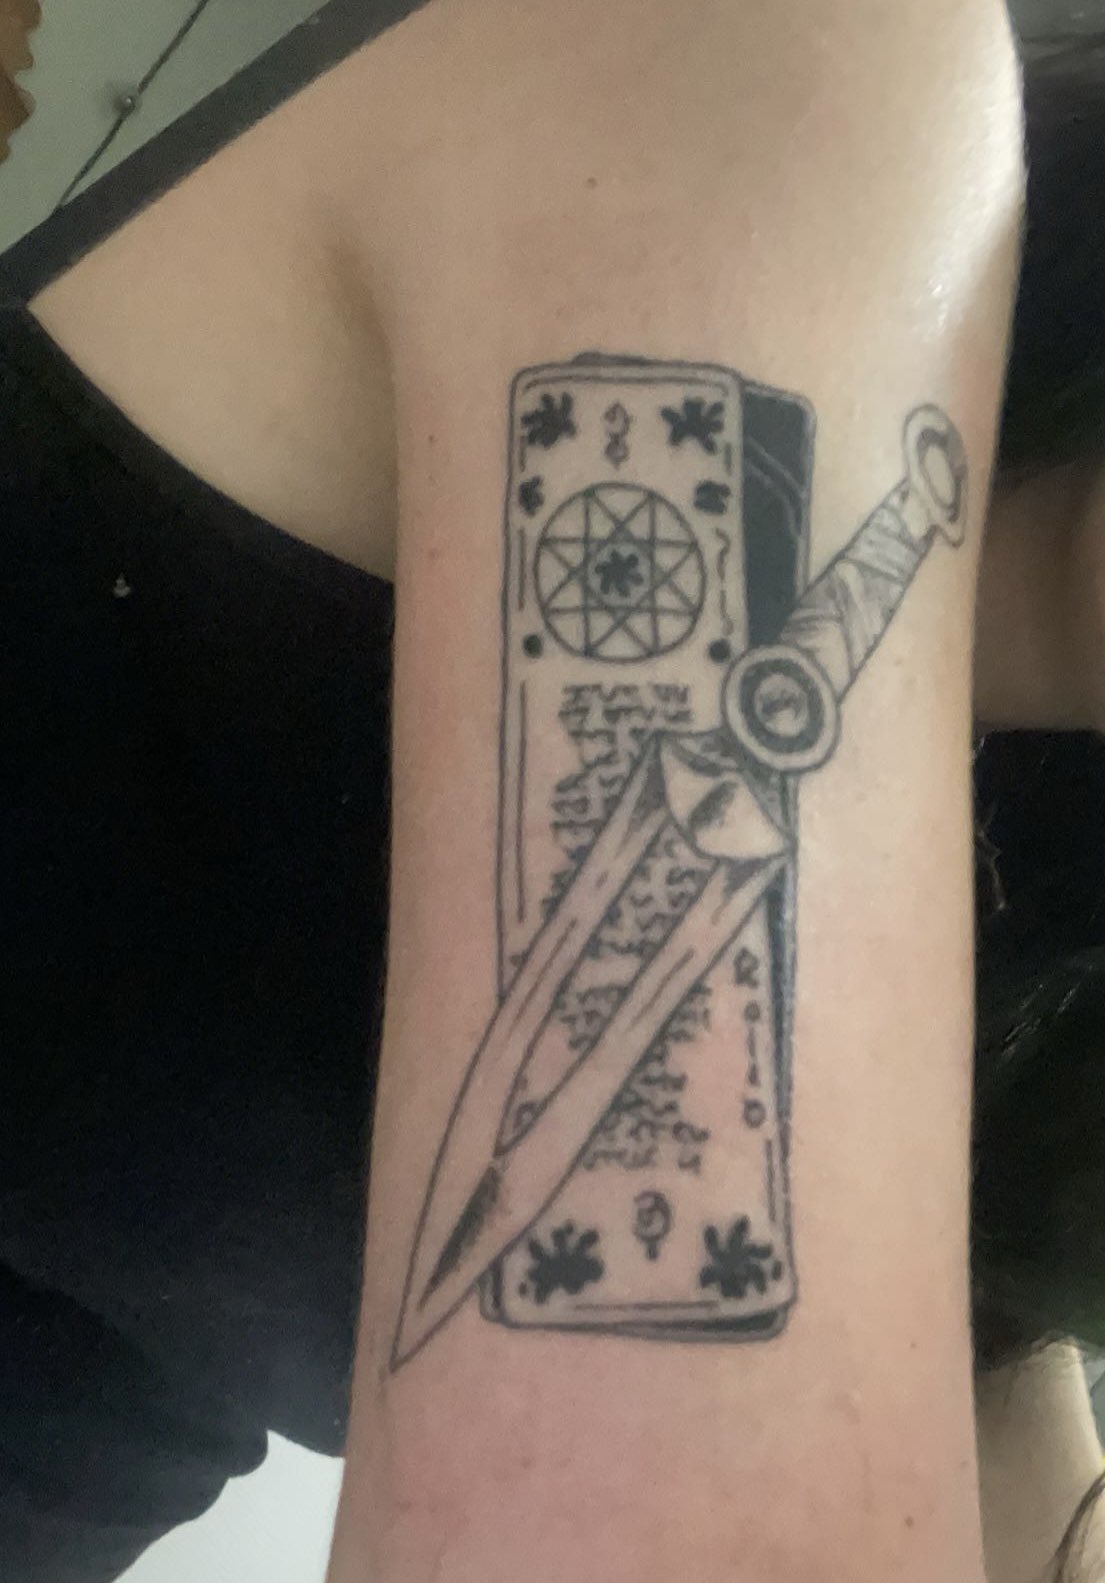 I finally got the tattoo that I've wanted since *checks notes* two days  ago! Tattoo done at Shop - bed stuy tattooing Co. In Brooklyn by artist -  Jayden : r/tattoo